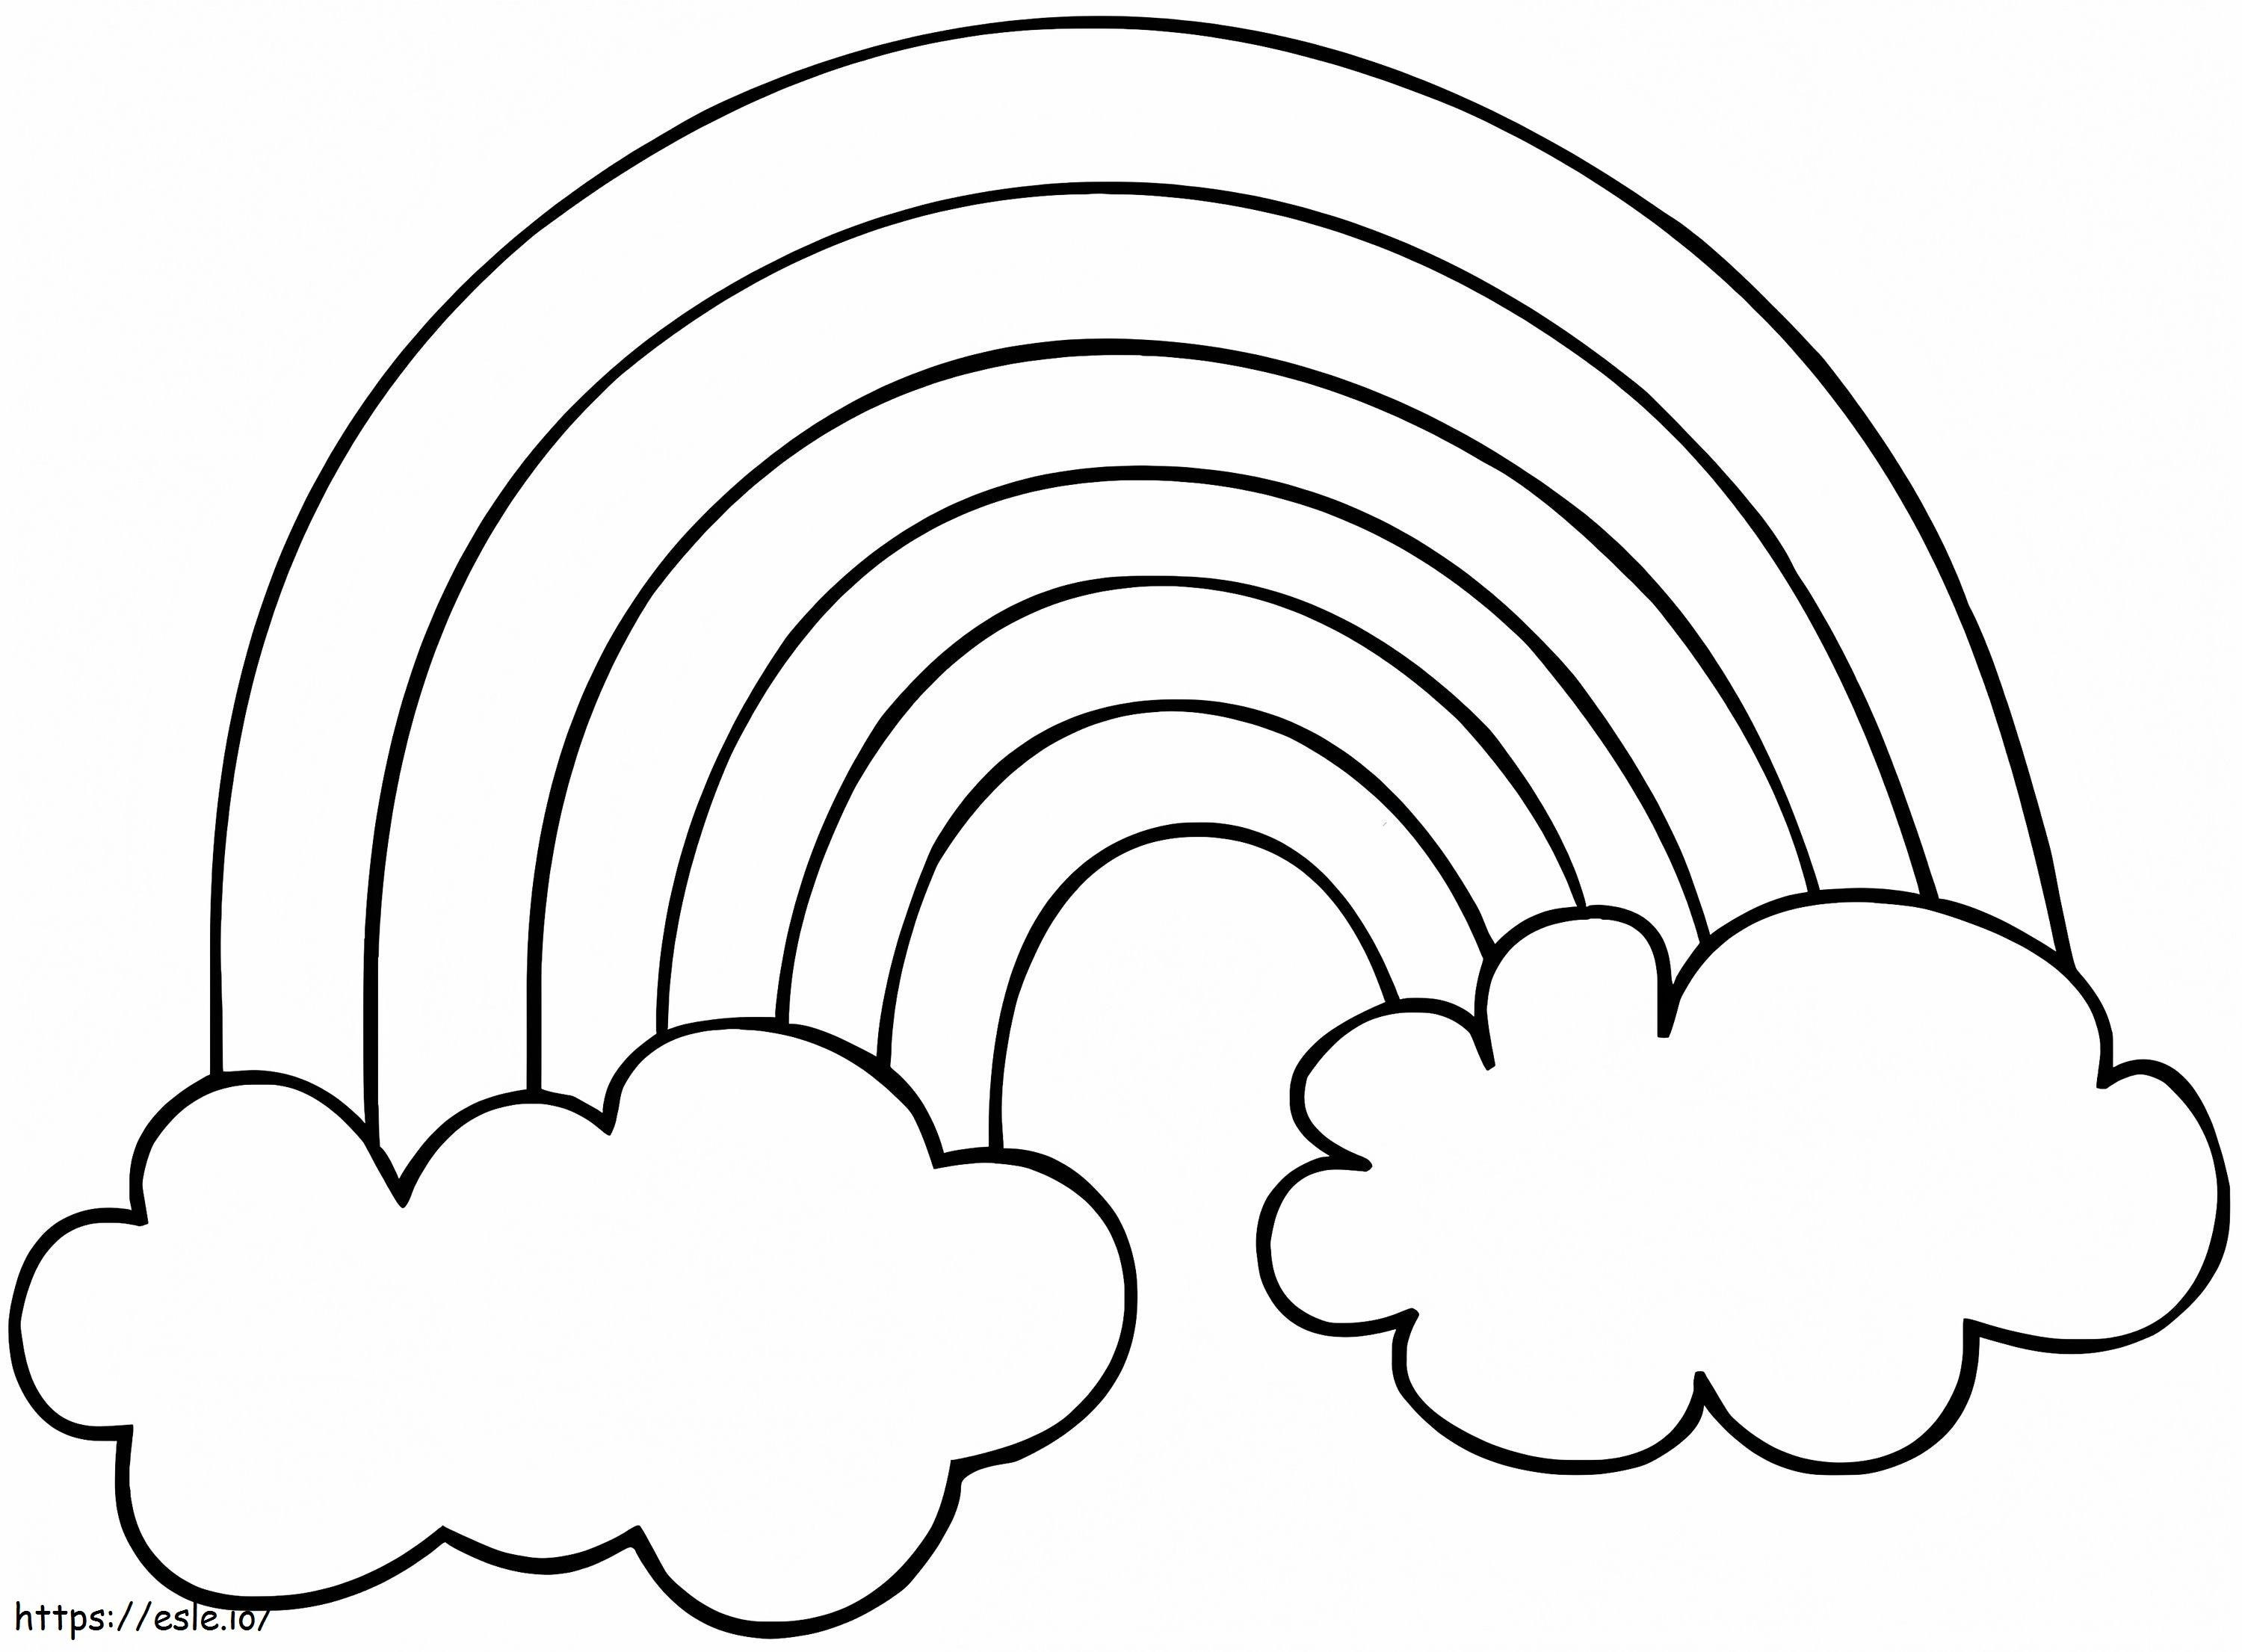 Easy Rainbow With Clouds coloring page